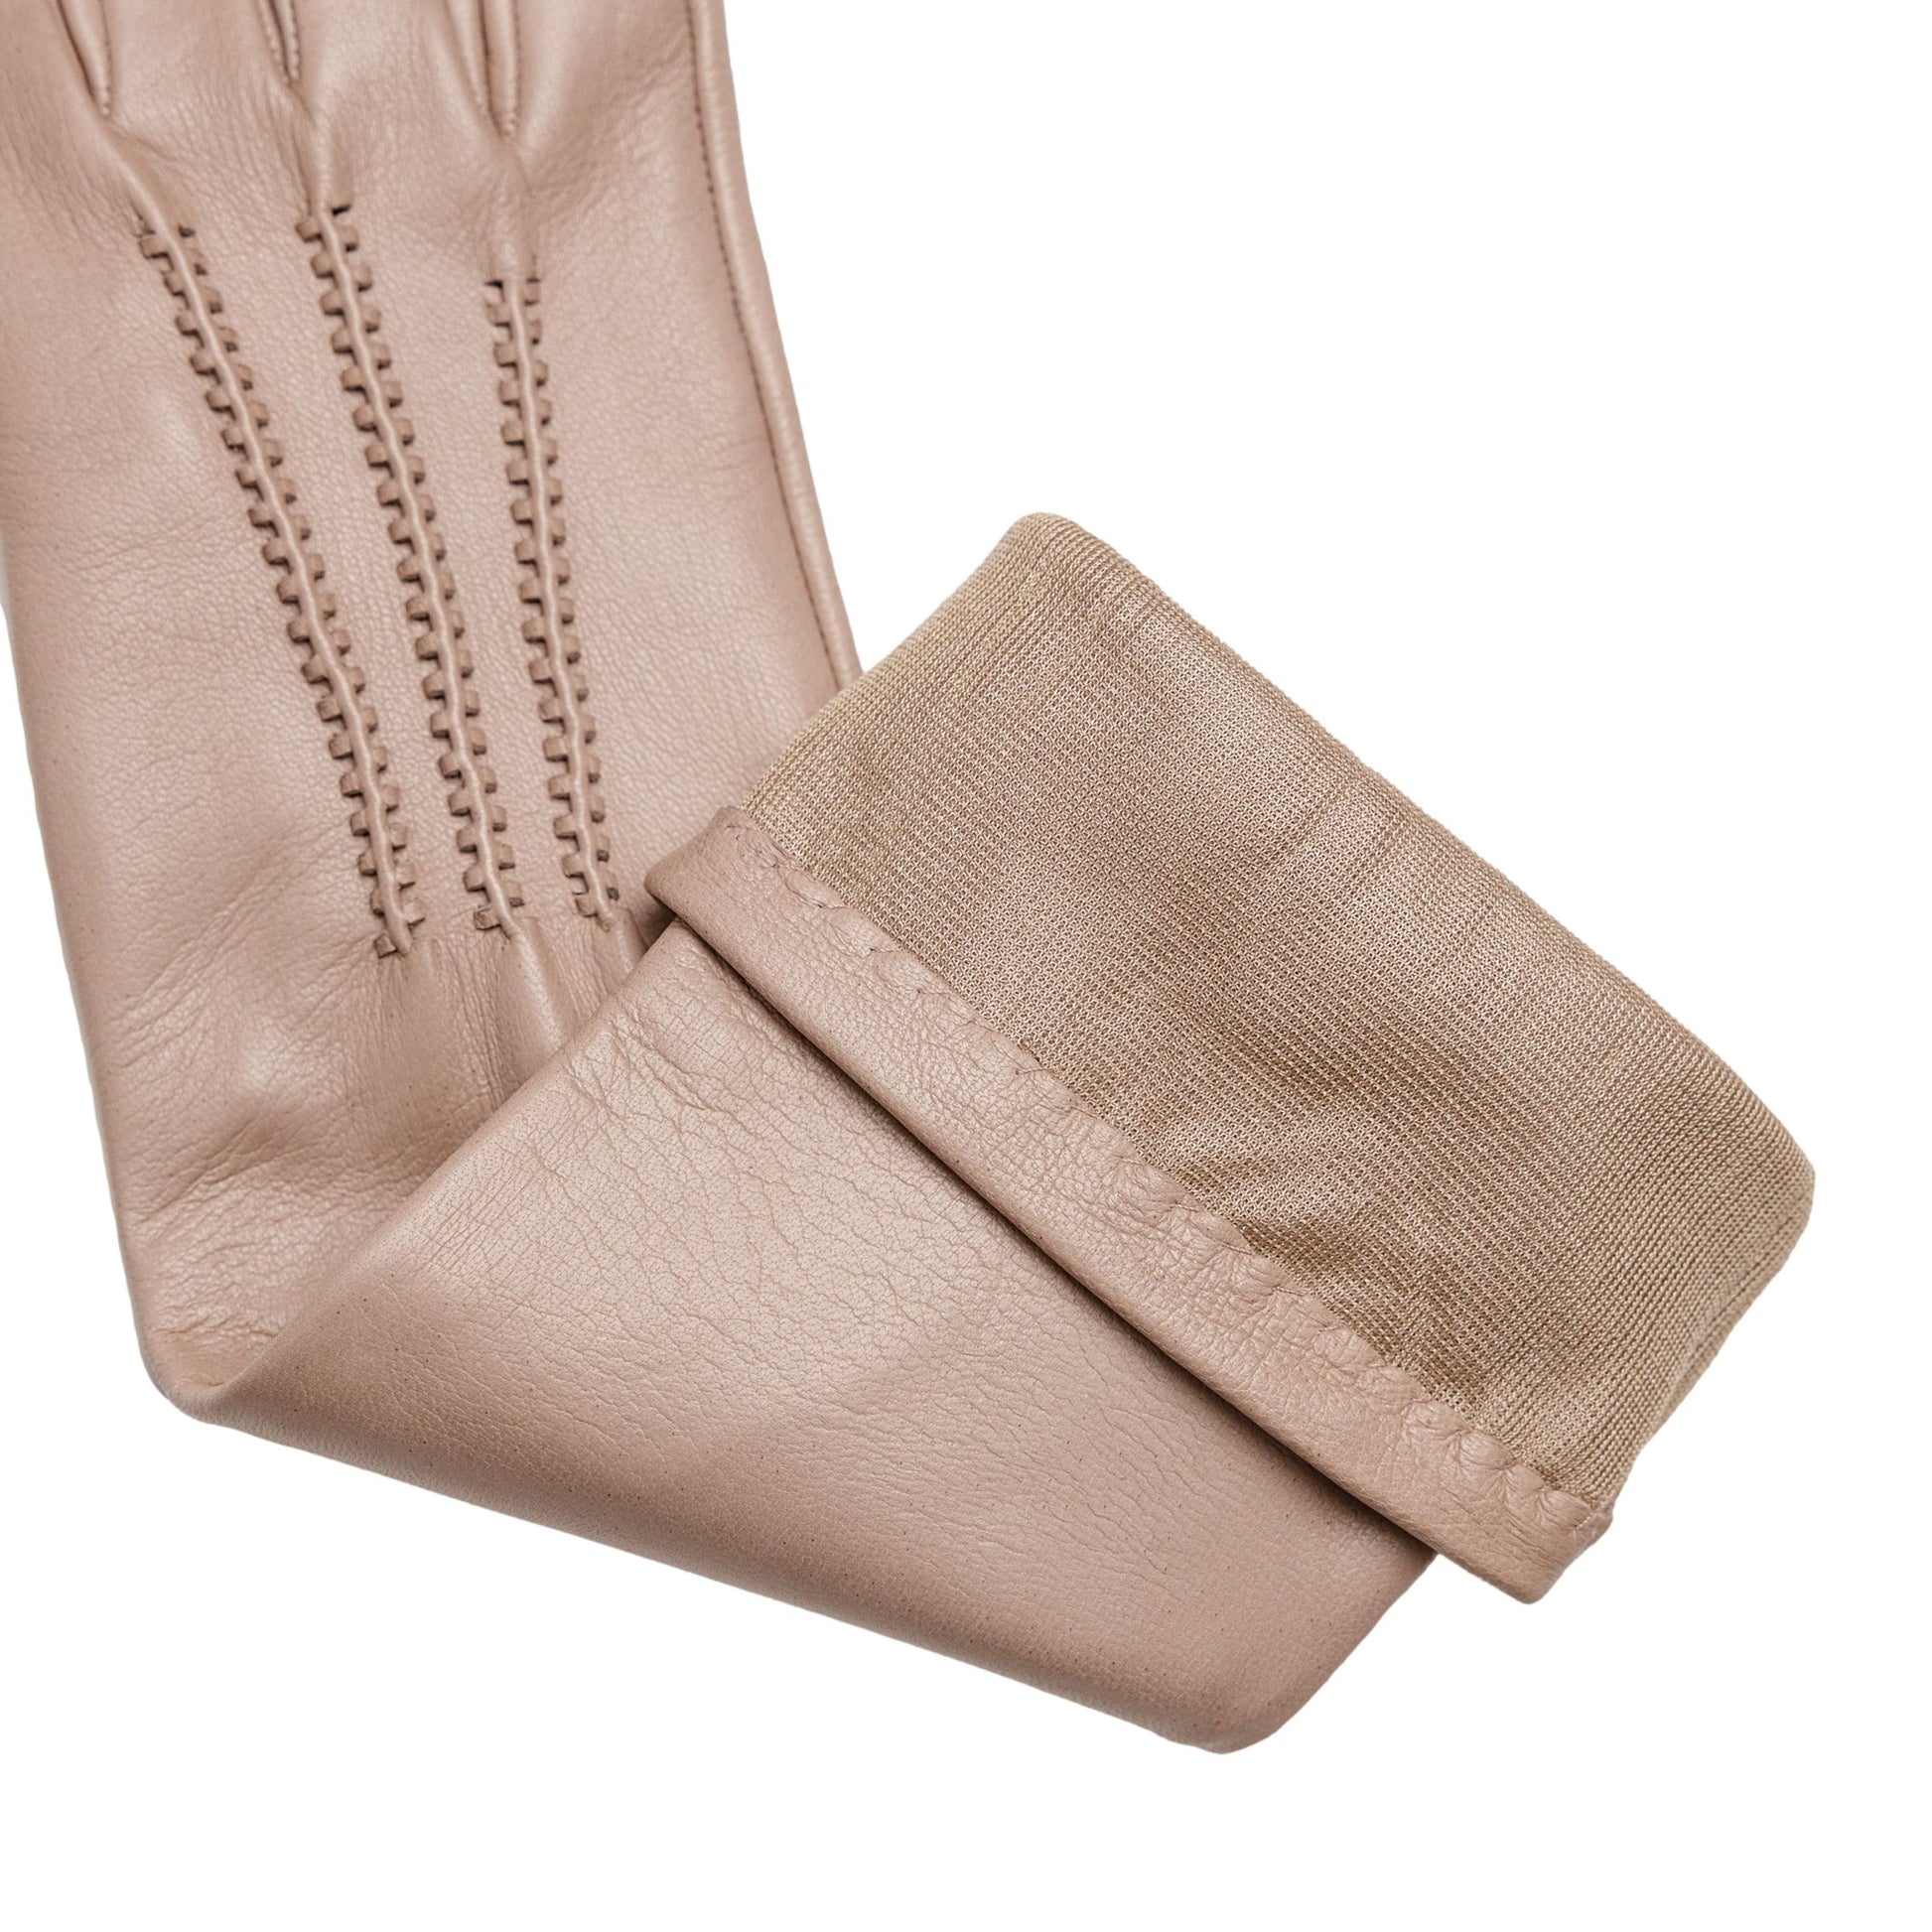 Women's pink nappa elegant gloves long to elbow and silk lined